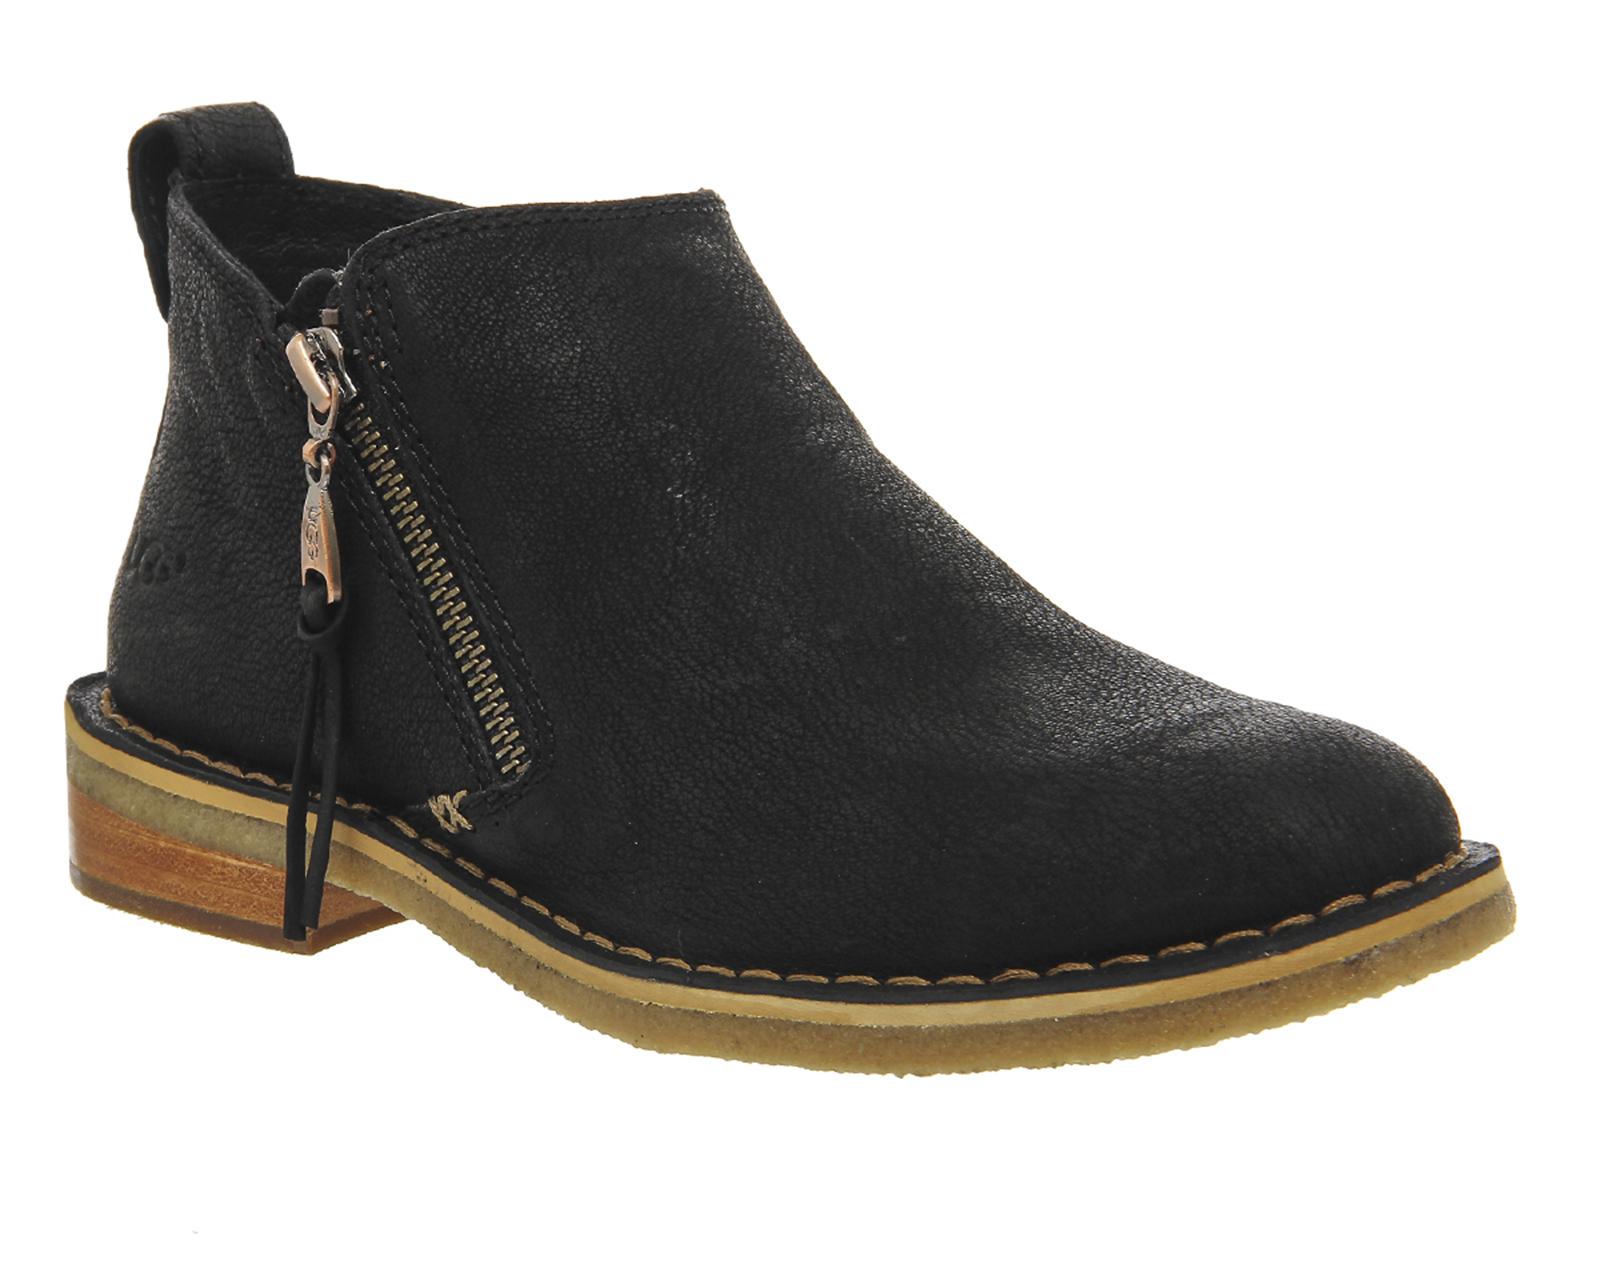 UGG Clementine Ankle Boots in Black - Lyst